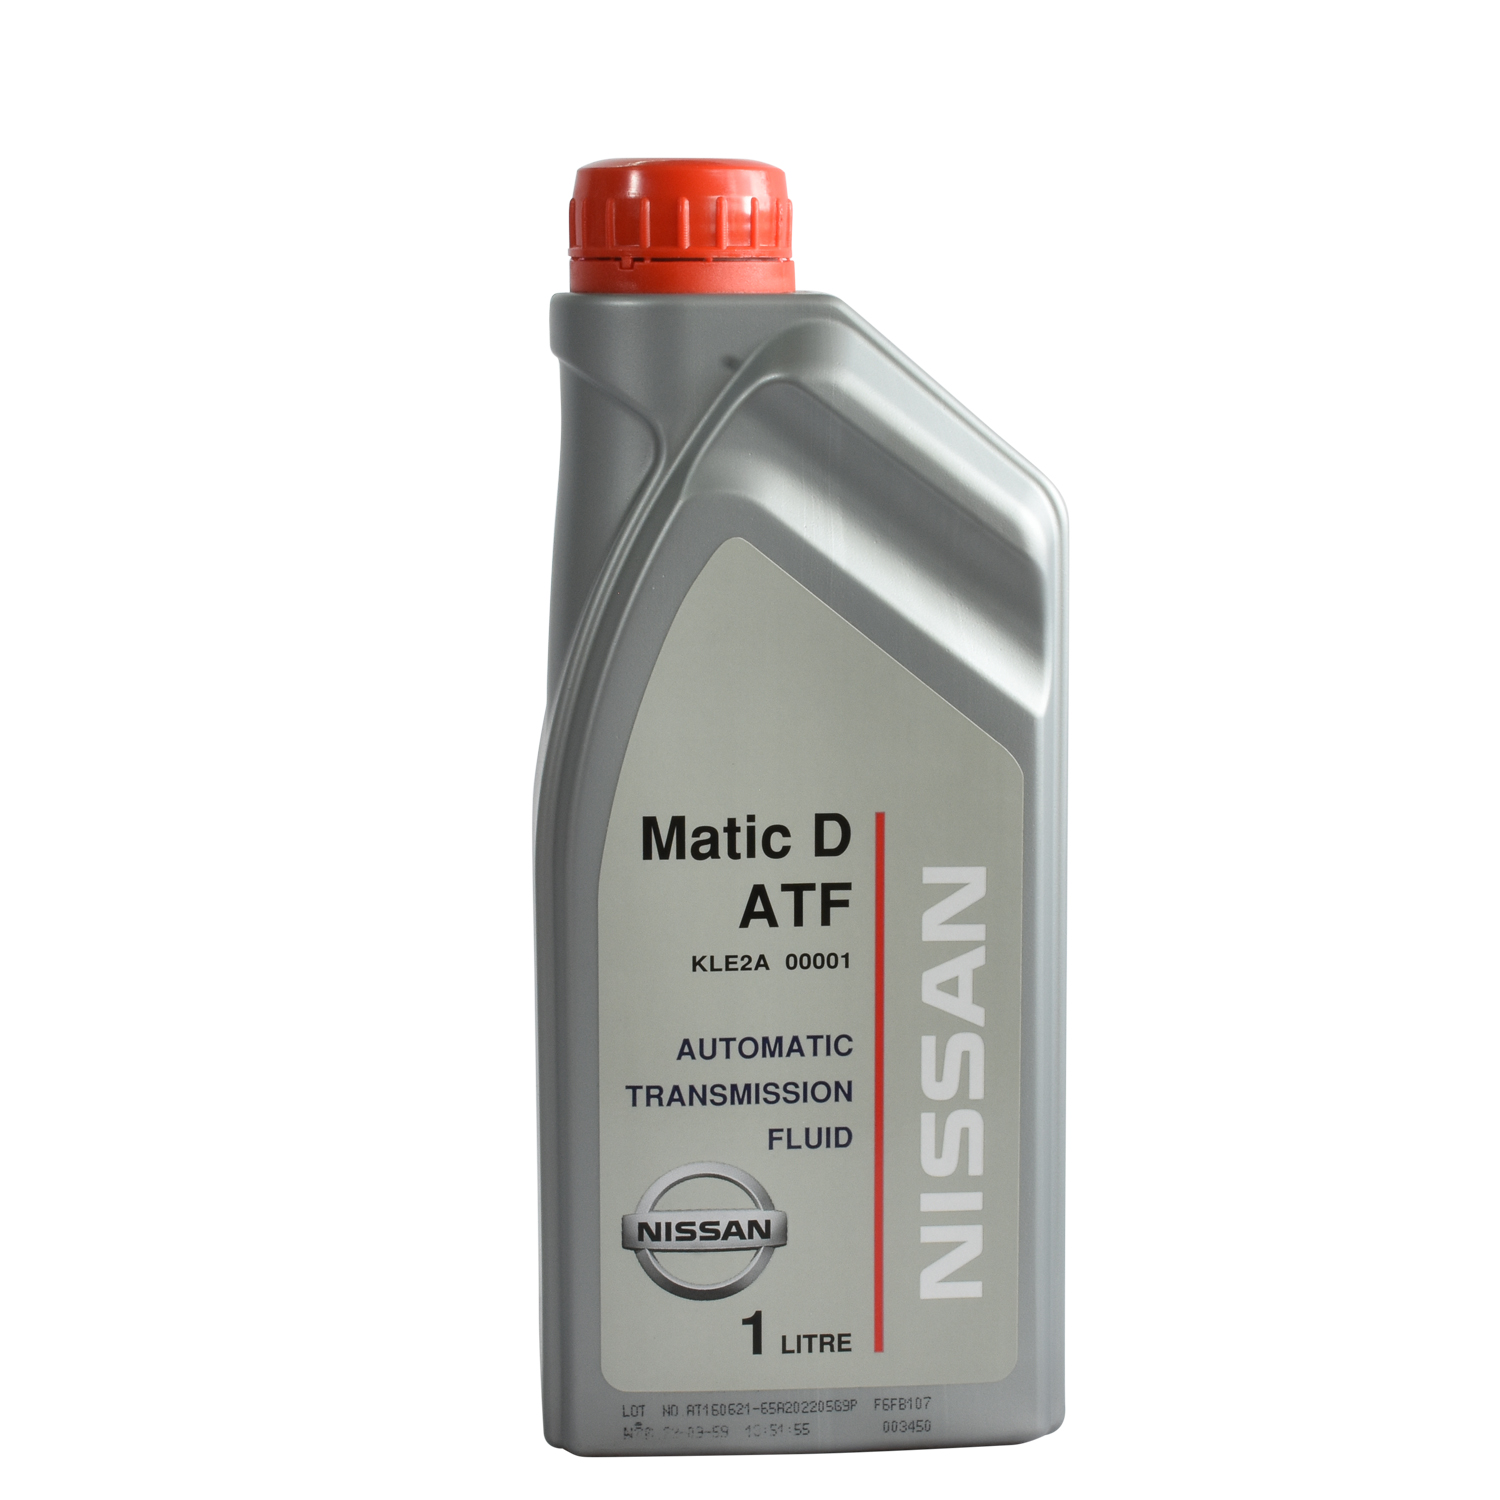 Atf d3. ATF Nissan matic j 5л. Nissan ATF matic d Fluid. Nissan ATF matic-s. Nissan ATF matic d (артикул 4л — kle22-00004).